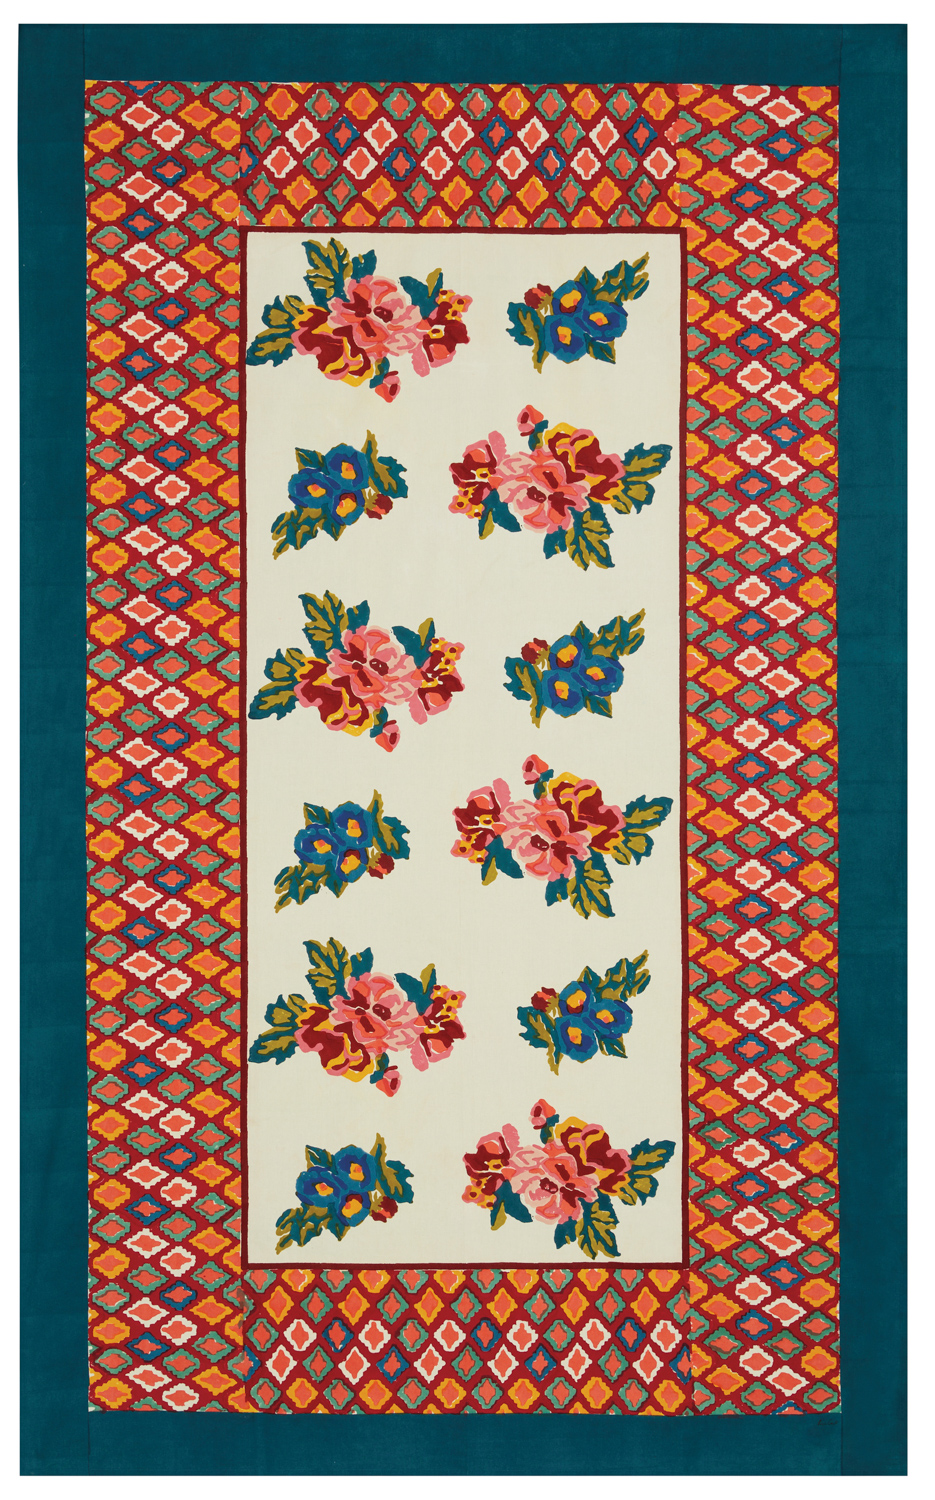 orange and green patterned rug with flower details in the middle